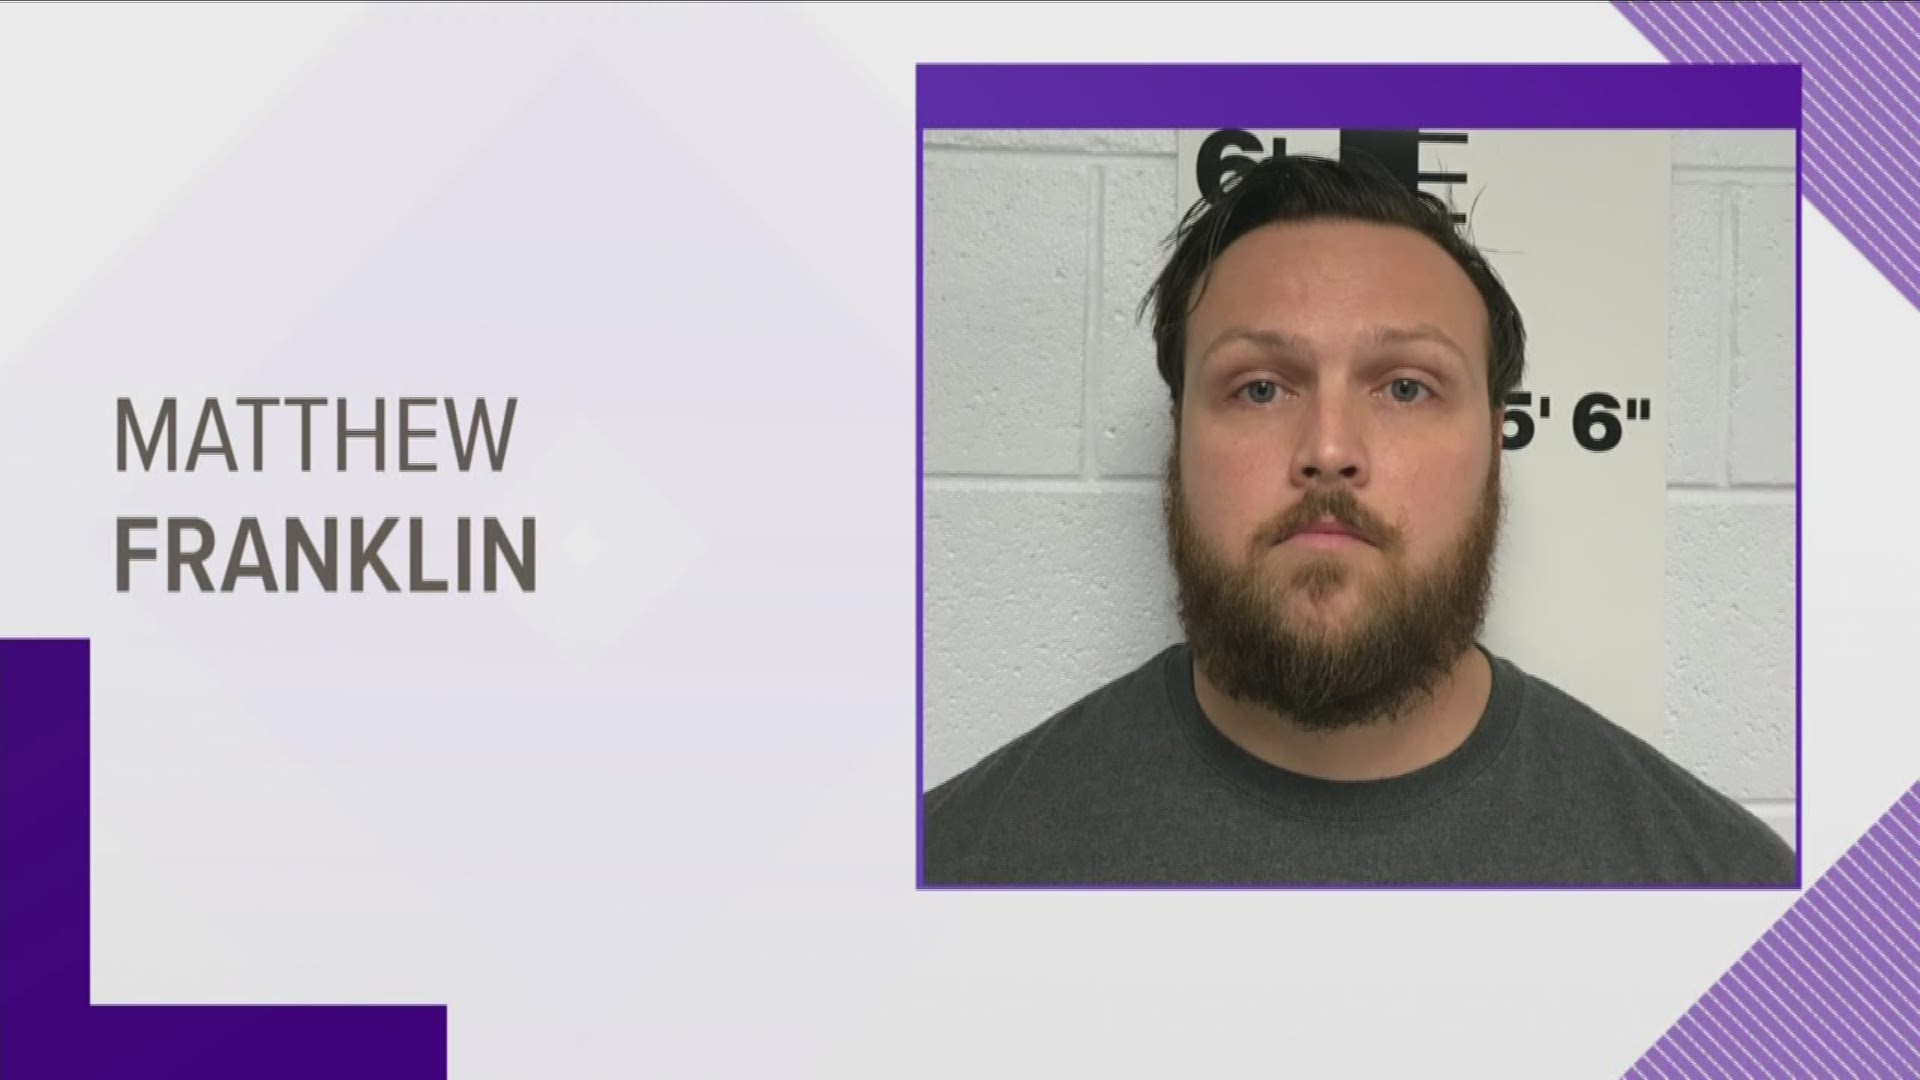 Agents said they learned that while Franklin was a recruiter for the national guard in New Tazewell, he reportedly engaged in sexual contact with three juveniles.